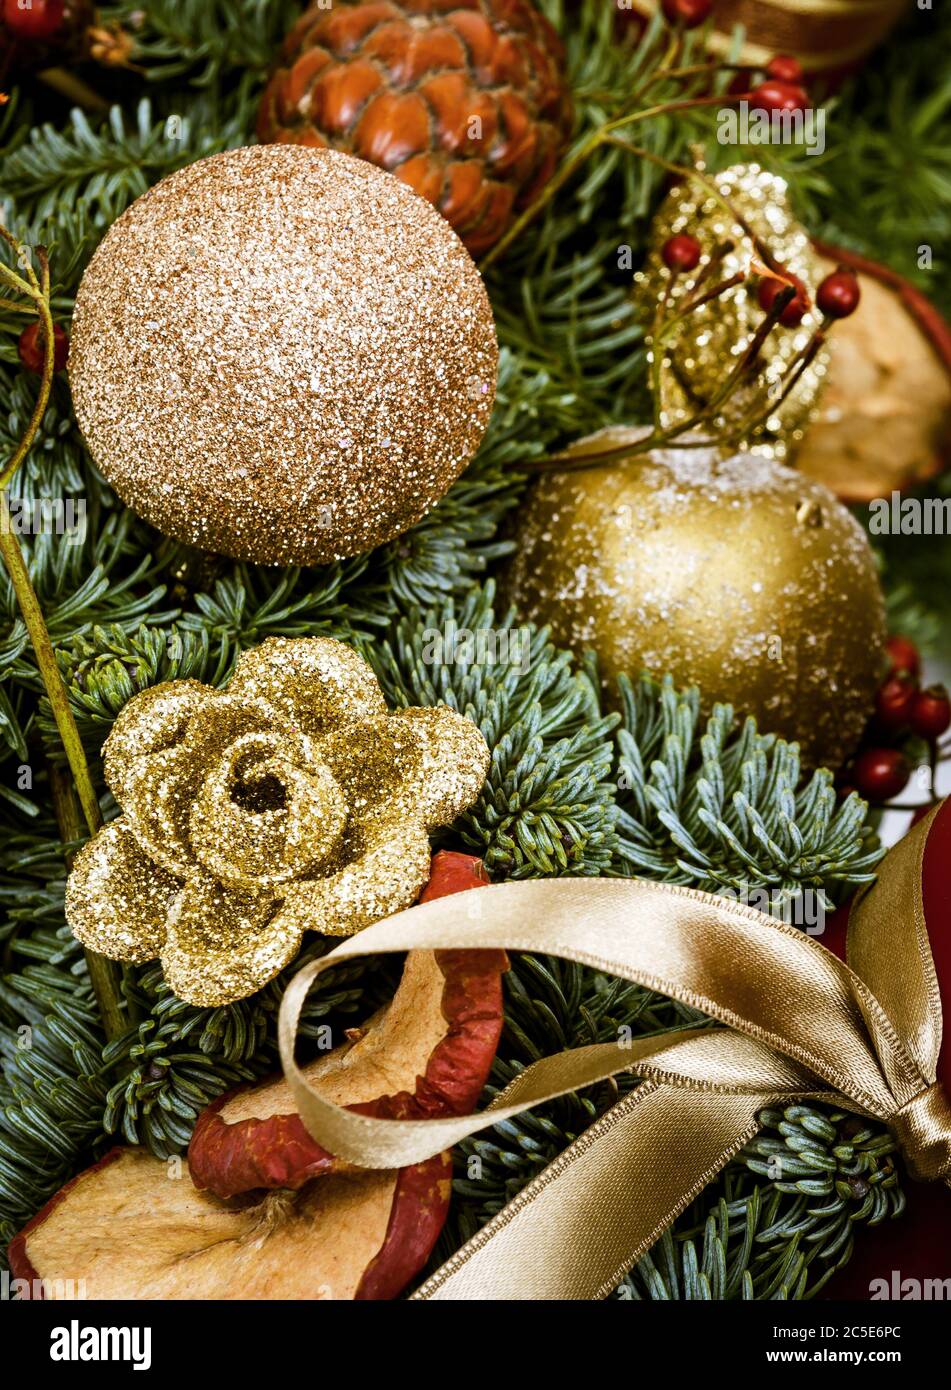 Christmas and New Year holiday decoration background Stock Photo